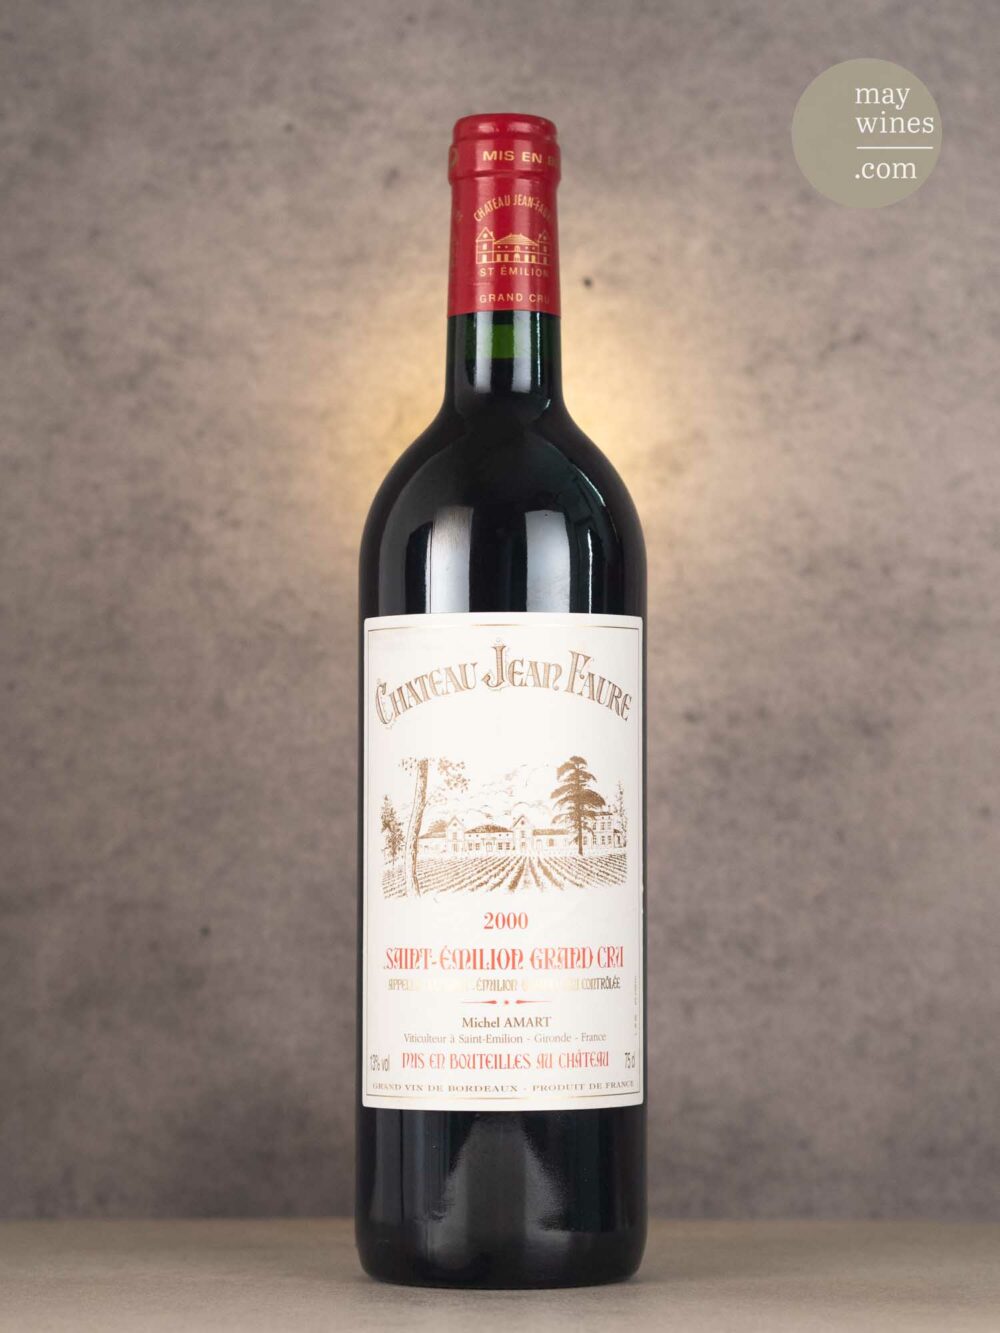 May Wines – Rotwein – 2000 Château Jean Faure